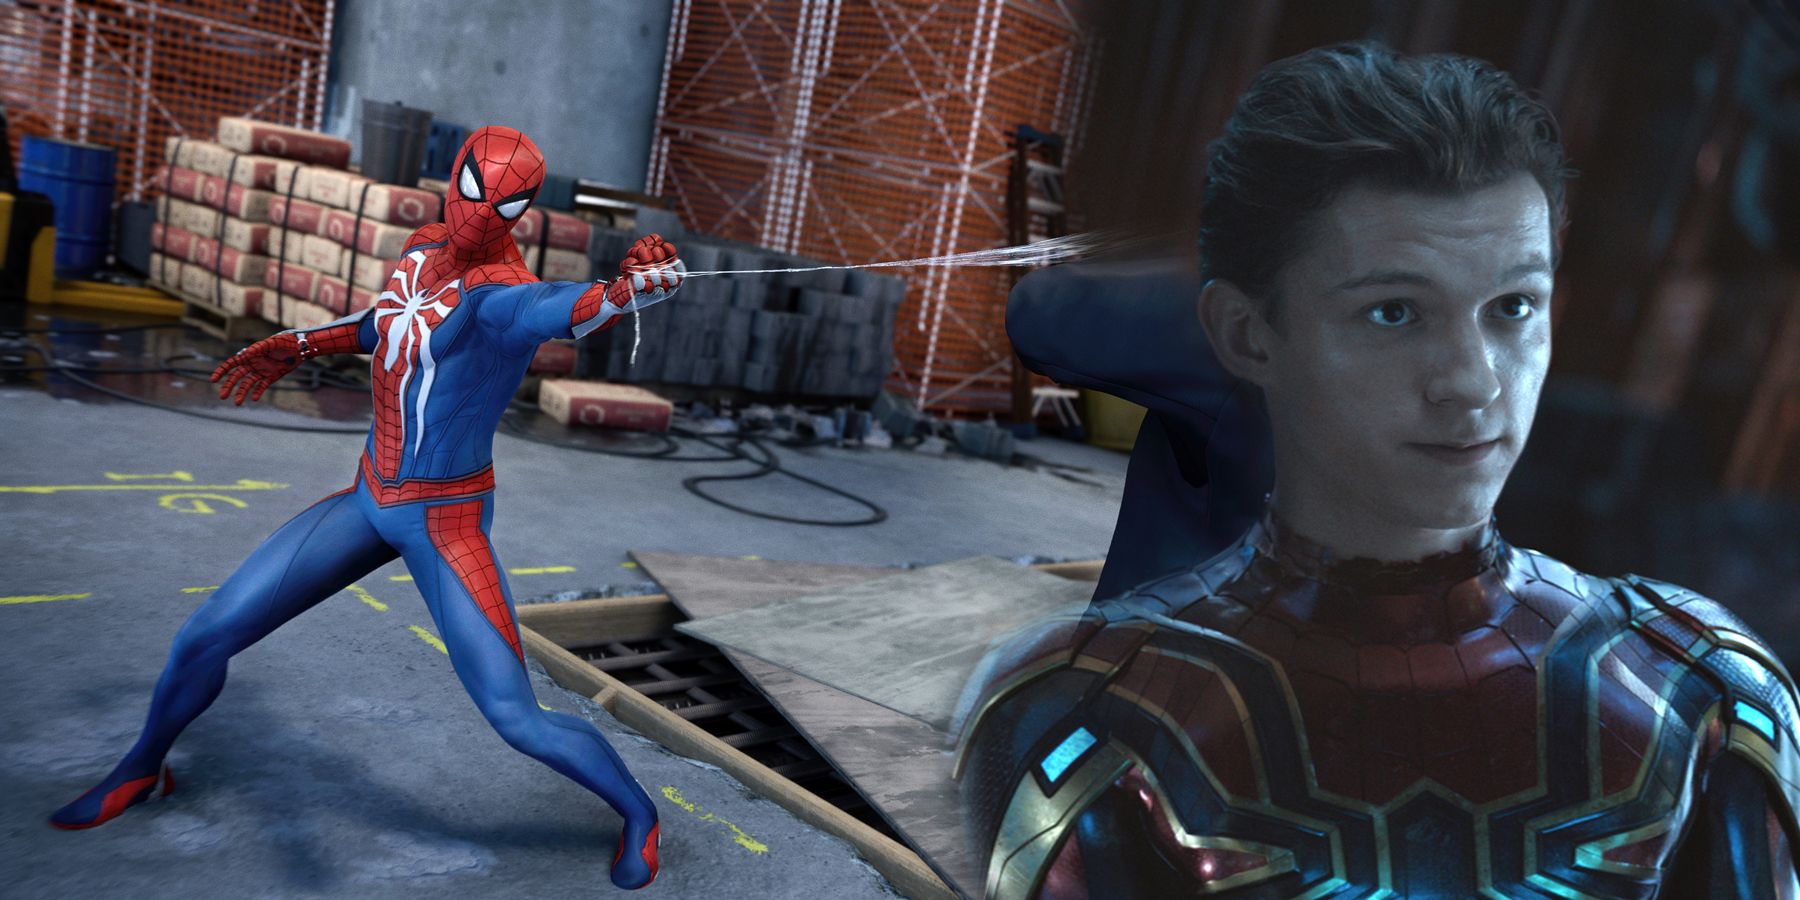 Spider-Man from Marvel's Spider-Man on PS4 and PS5 alongside Tom Holland's Spider-Man from the MCU.